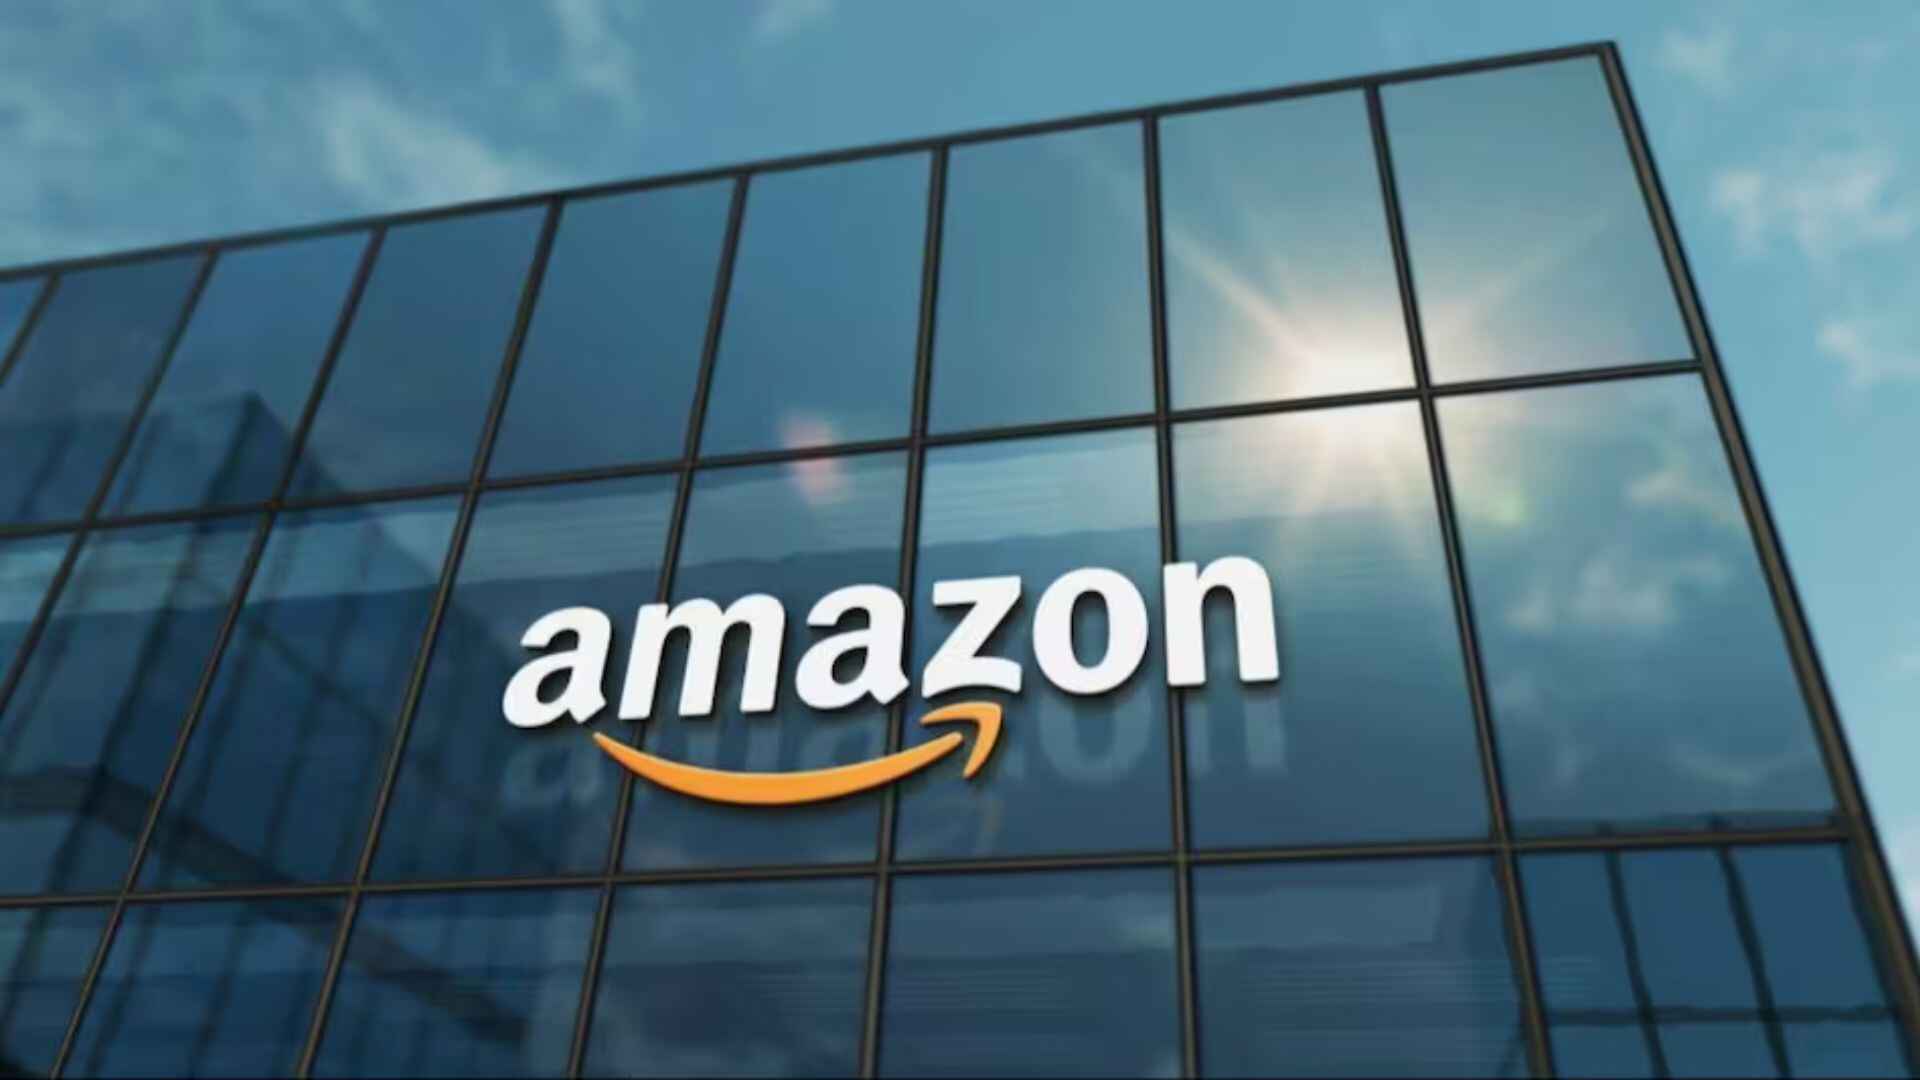 Amazon ran an alleged firm called Big River